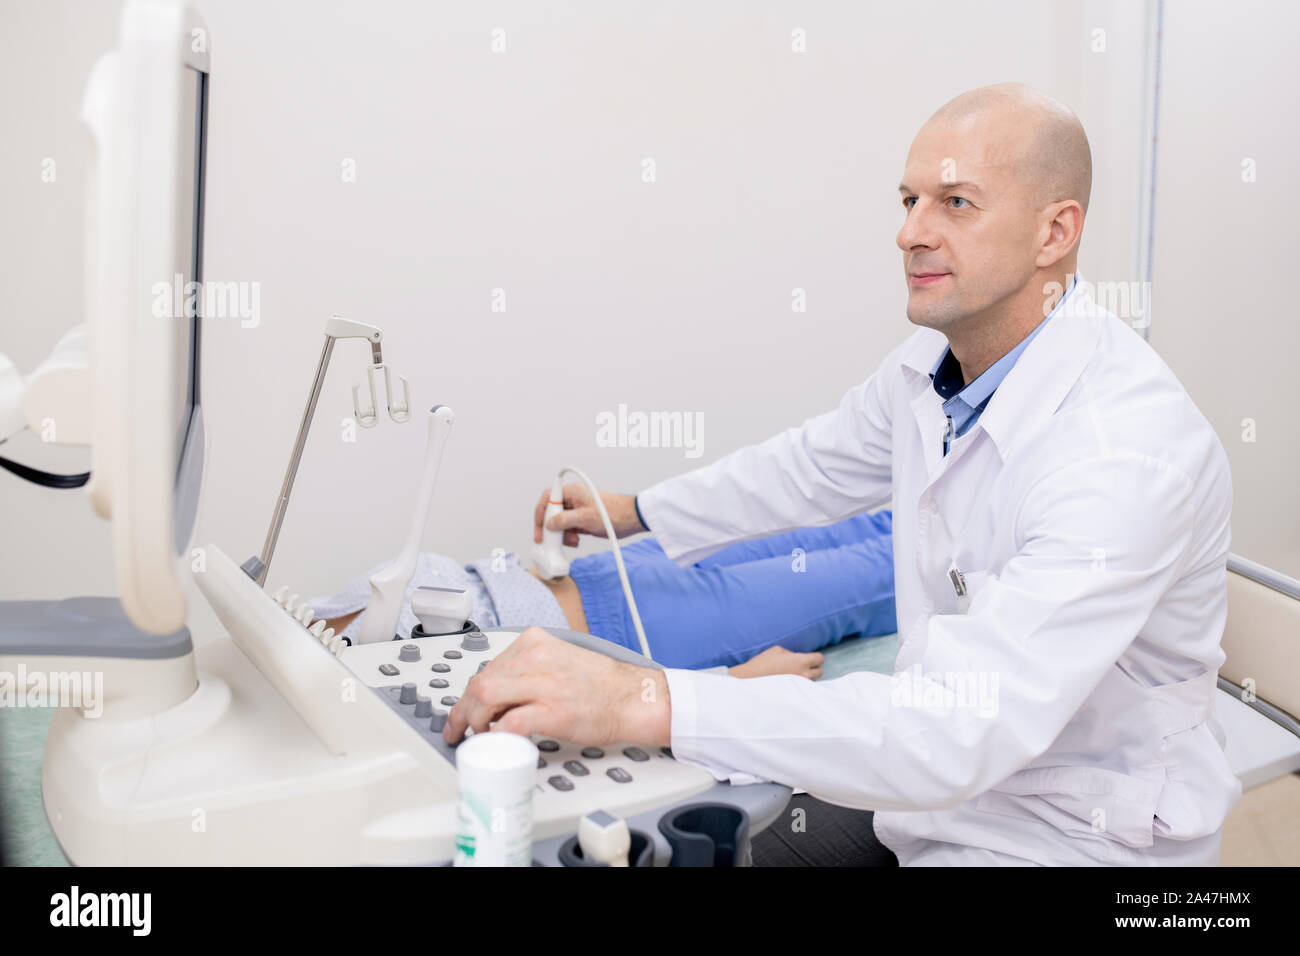 Confident professional looking at screen while making ultrasonic examination Stock Photo